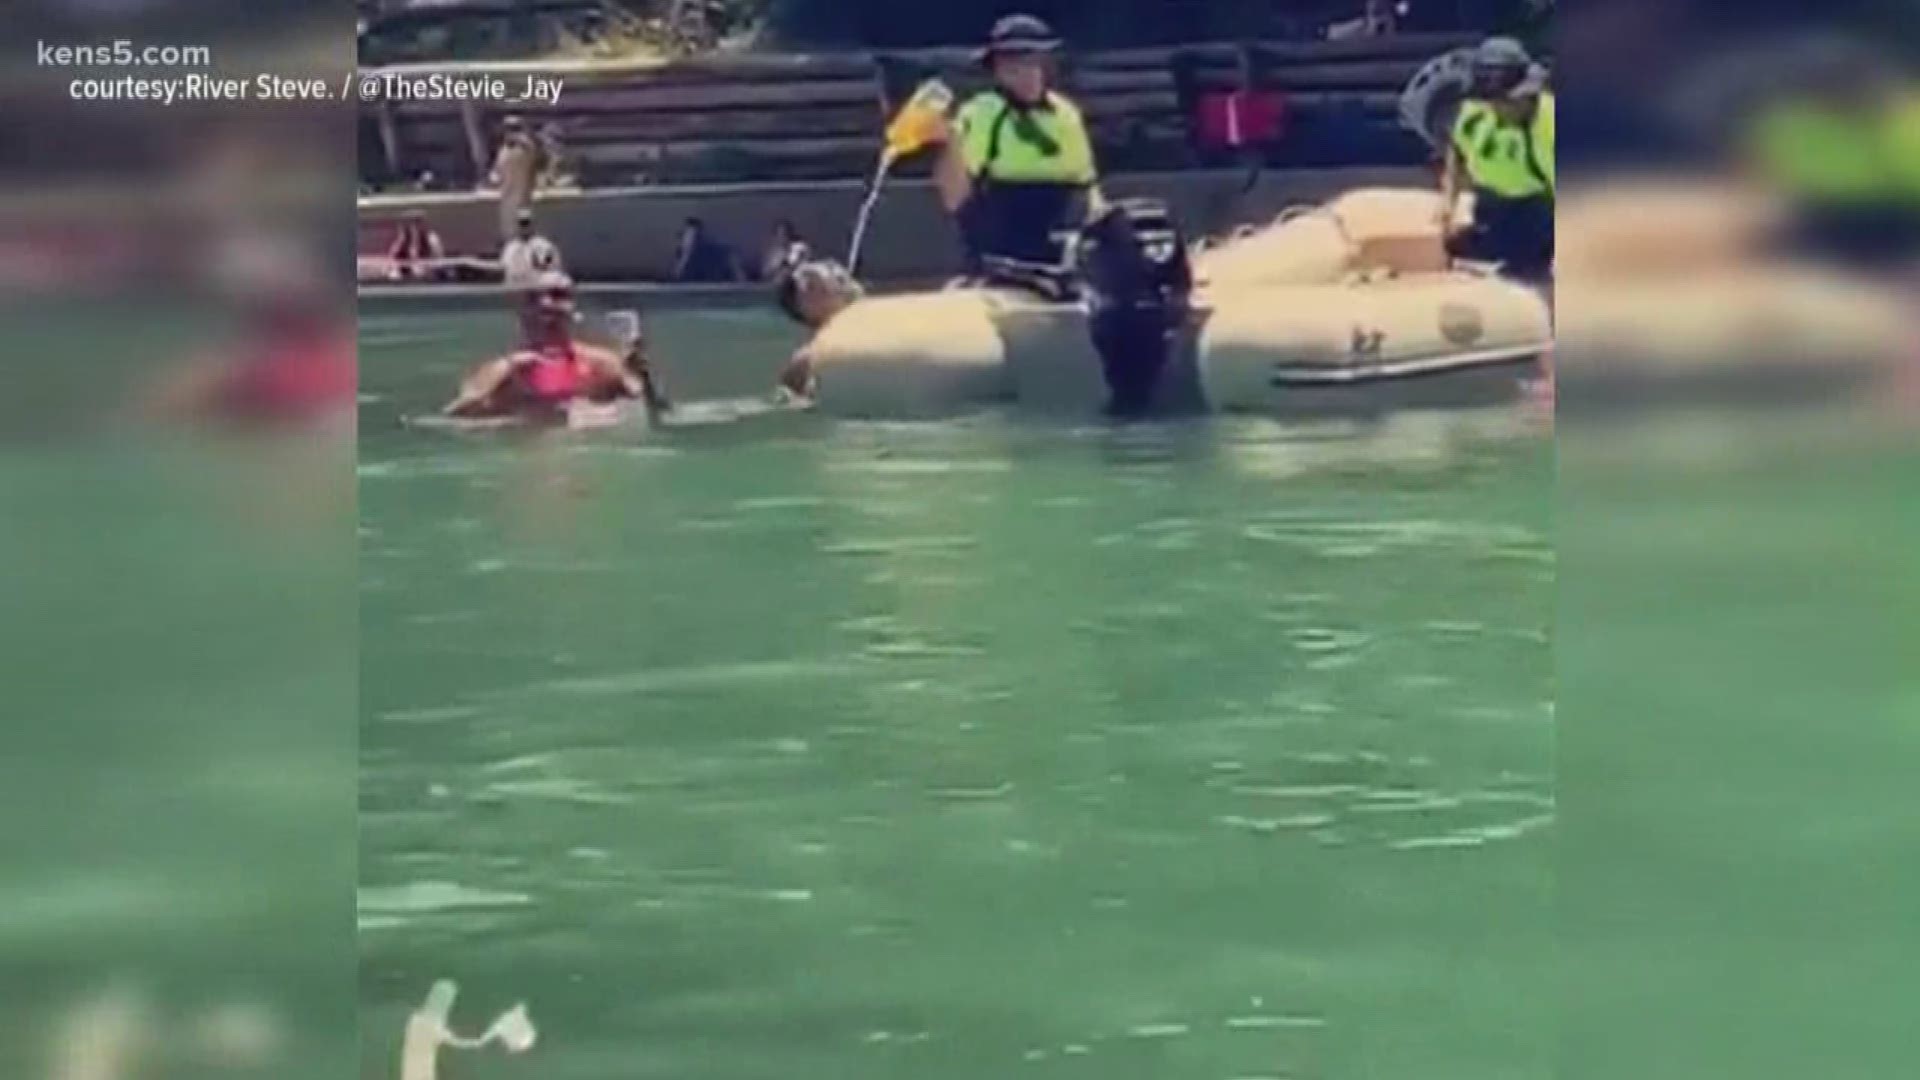 The viral video of a San Antonio man on the Comal River has been viewed millions of times.